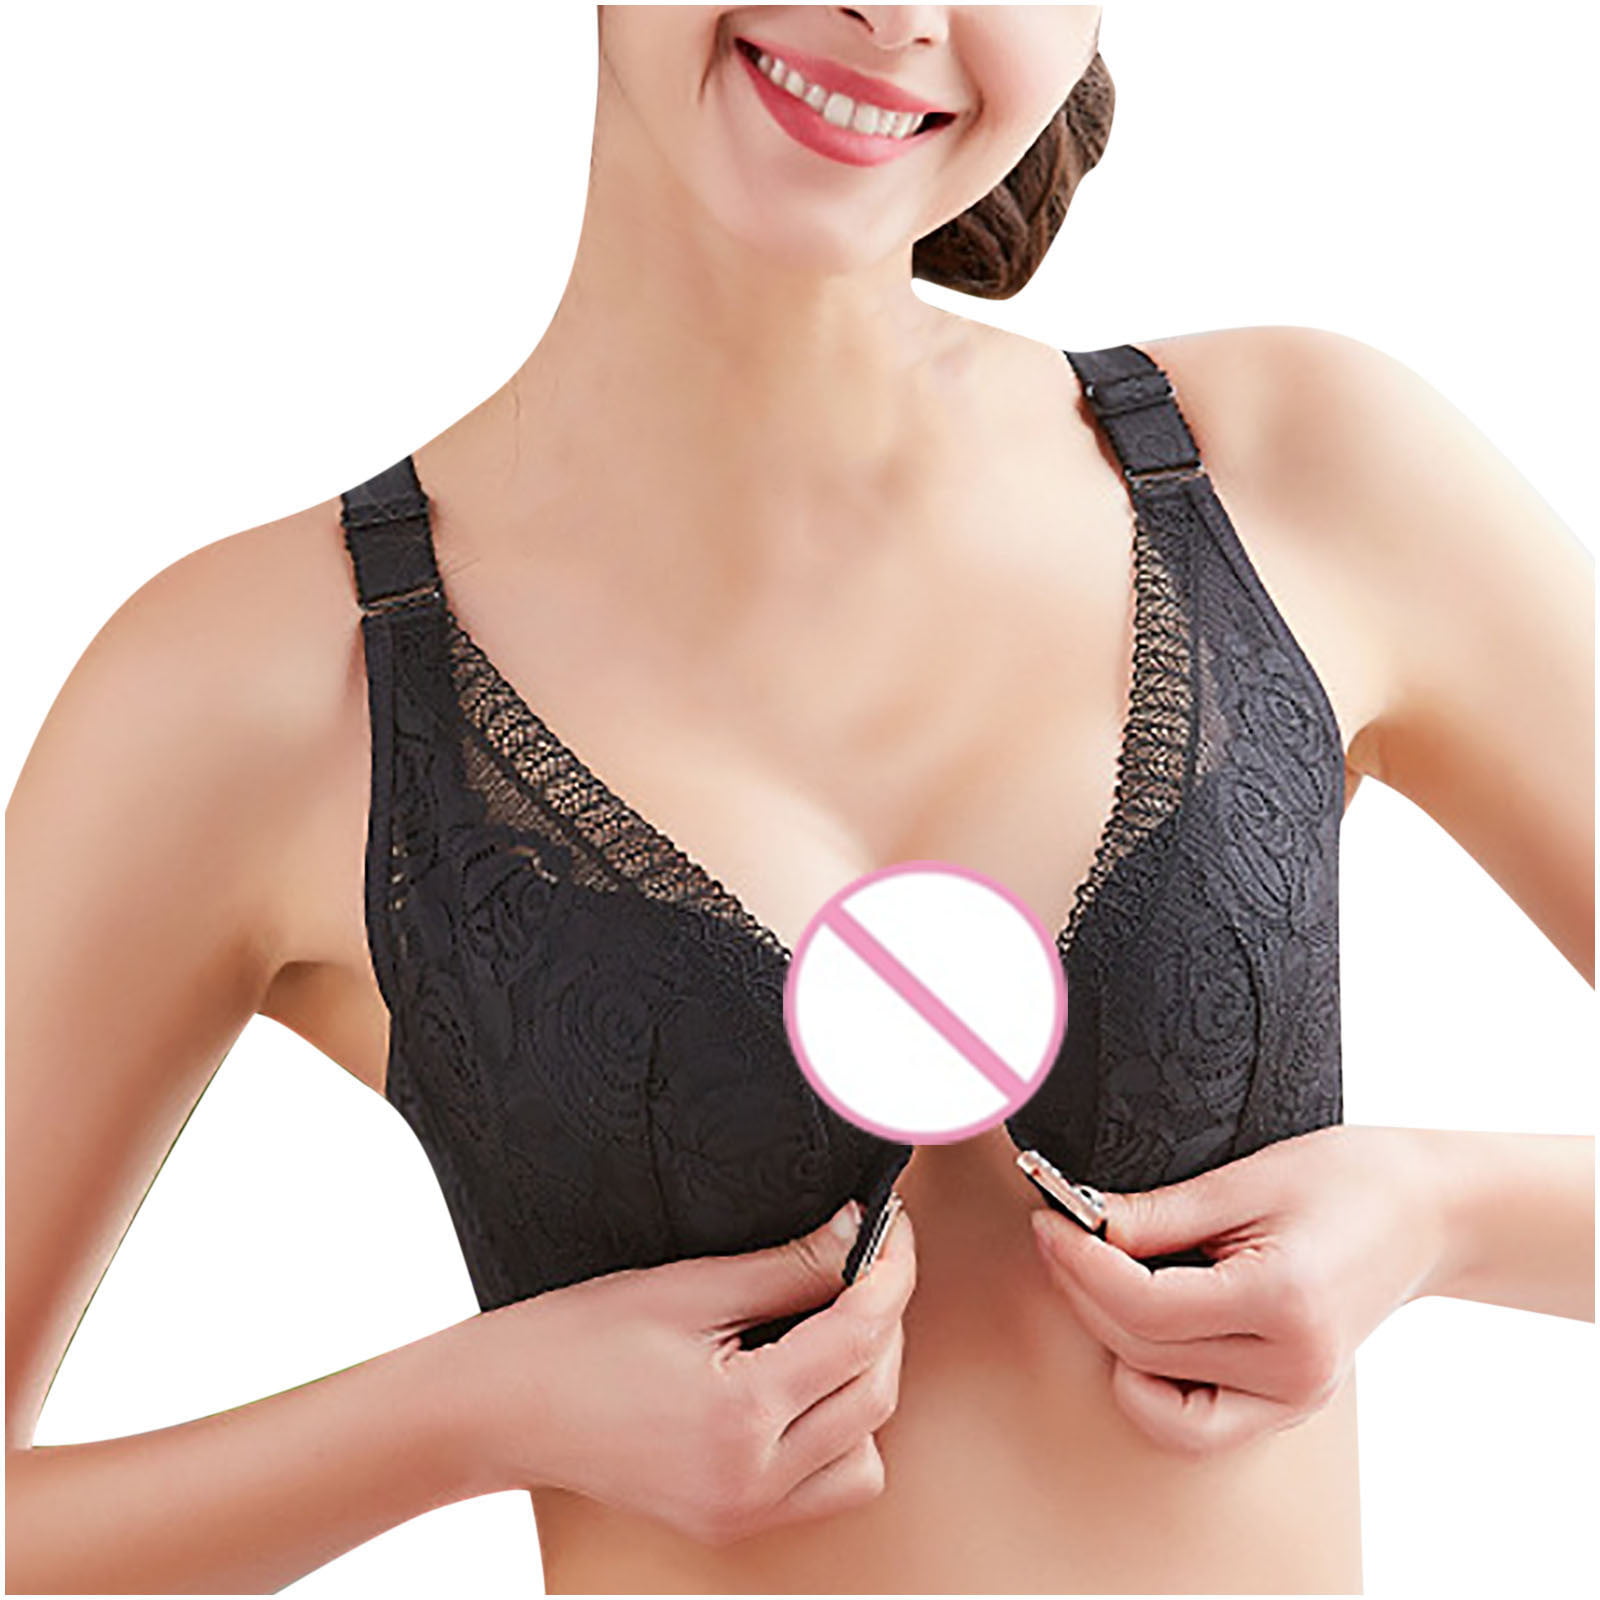 JGGSPWM Woman's Fashion Front Closure Rose Beauty Back Wire Free Push Up  Hollow Out Bra Underwear Black M 